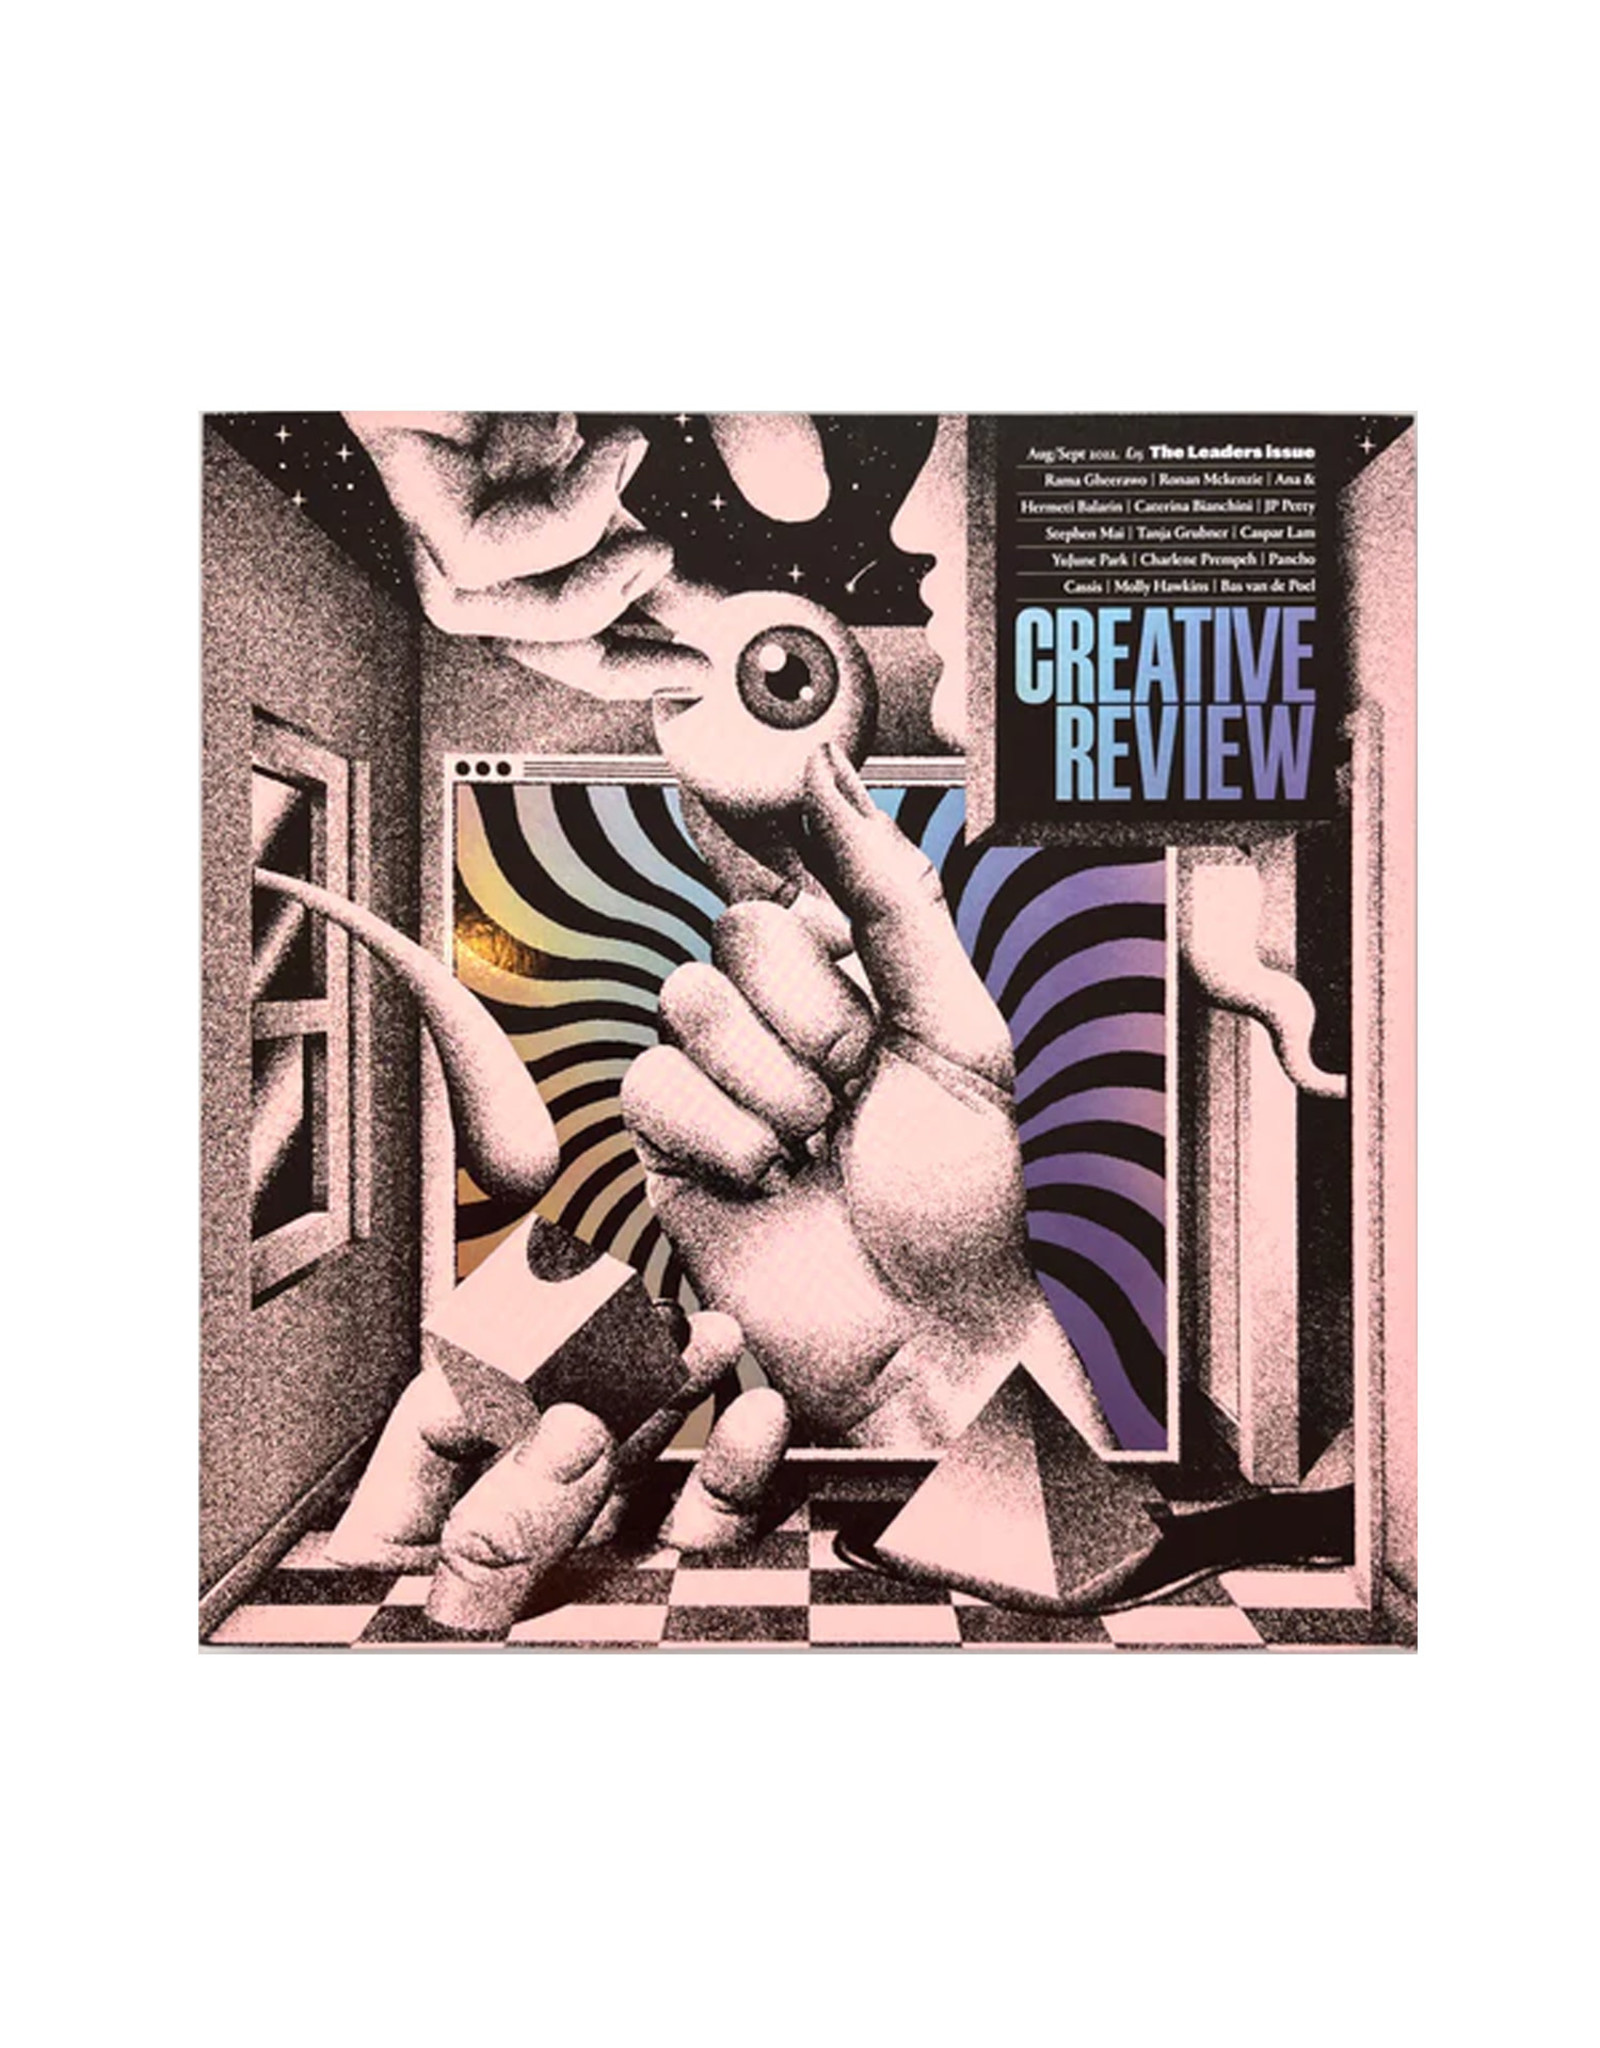 Creative Review, Issue 4, Vol. 42